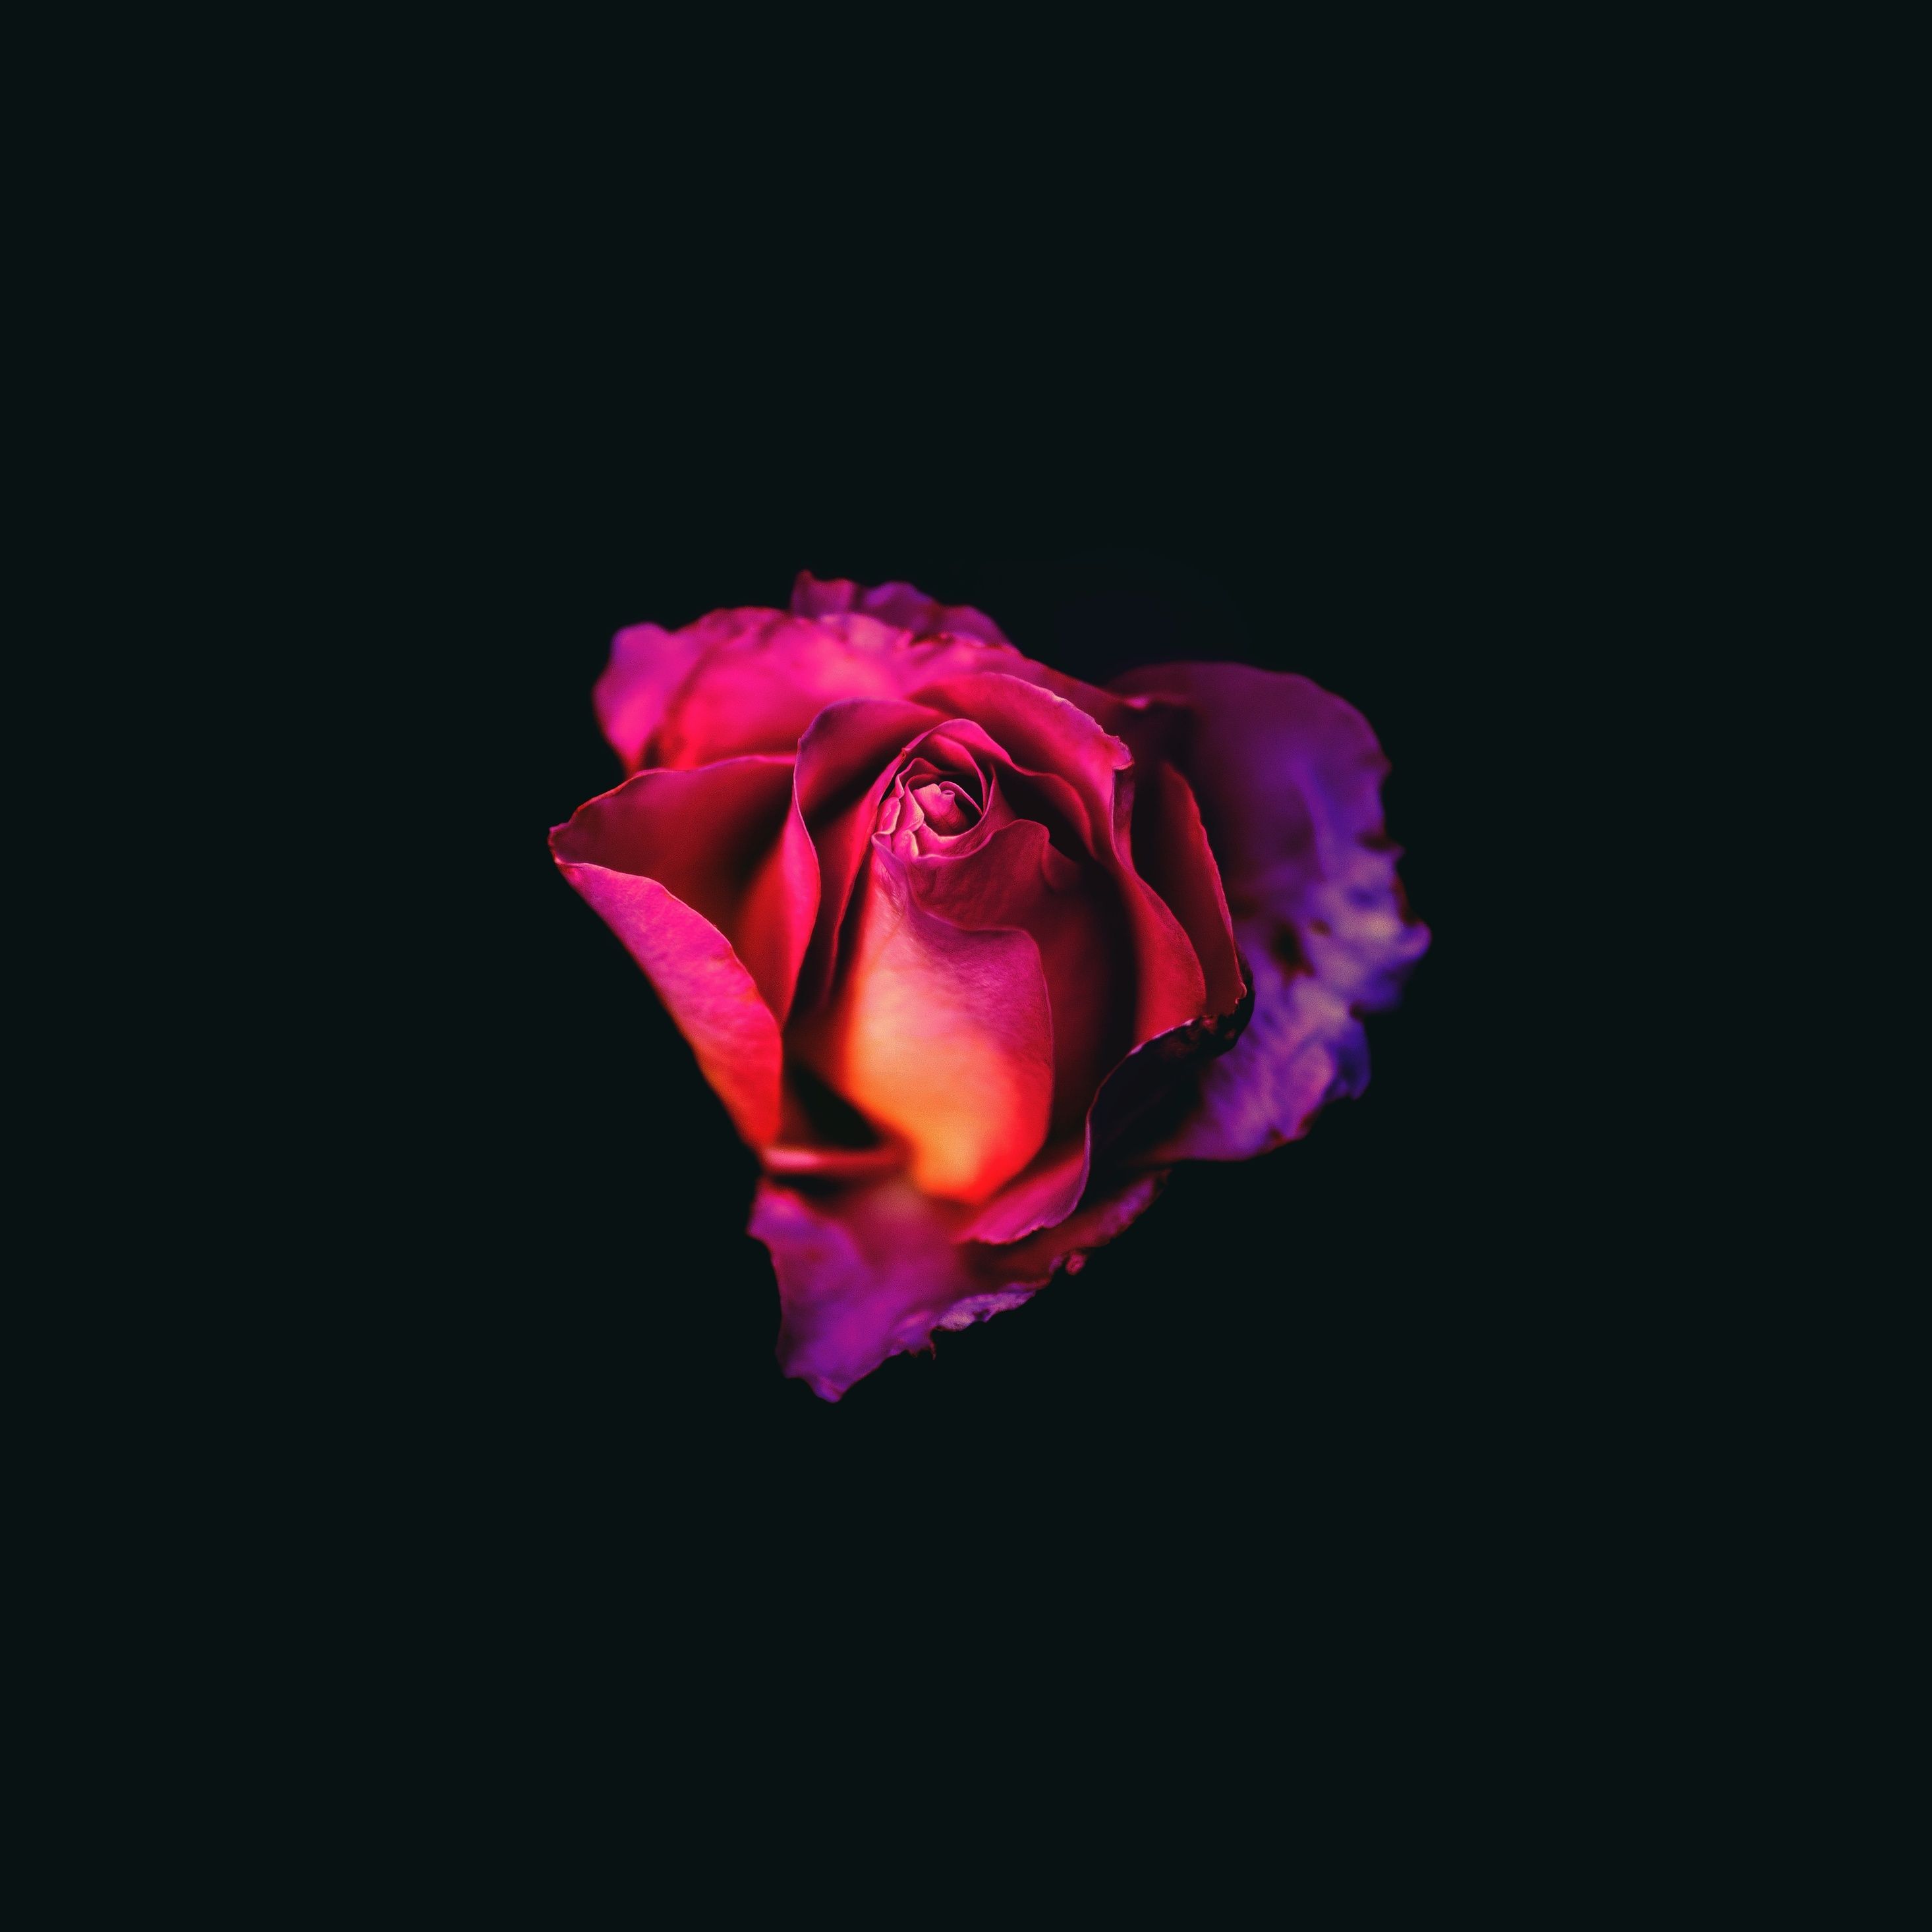 2932x2932 Rose Oled Dark 8k Ipad Pro Retina Display HD 4k Wallpapers, Image, Backgrounds, Photos and Pictures